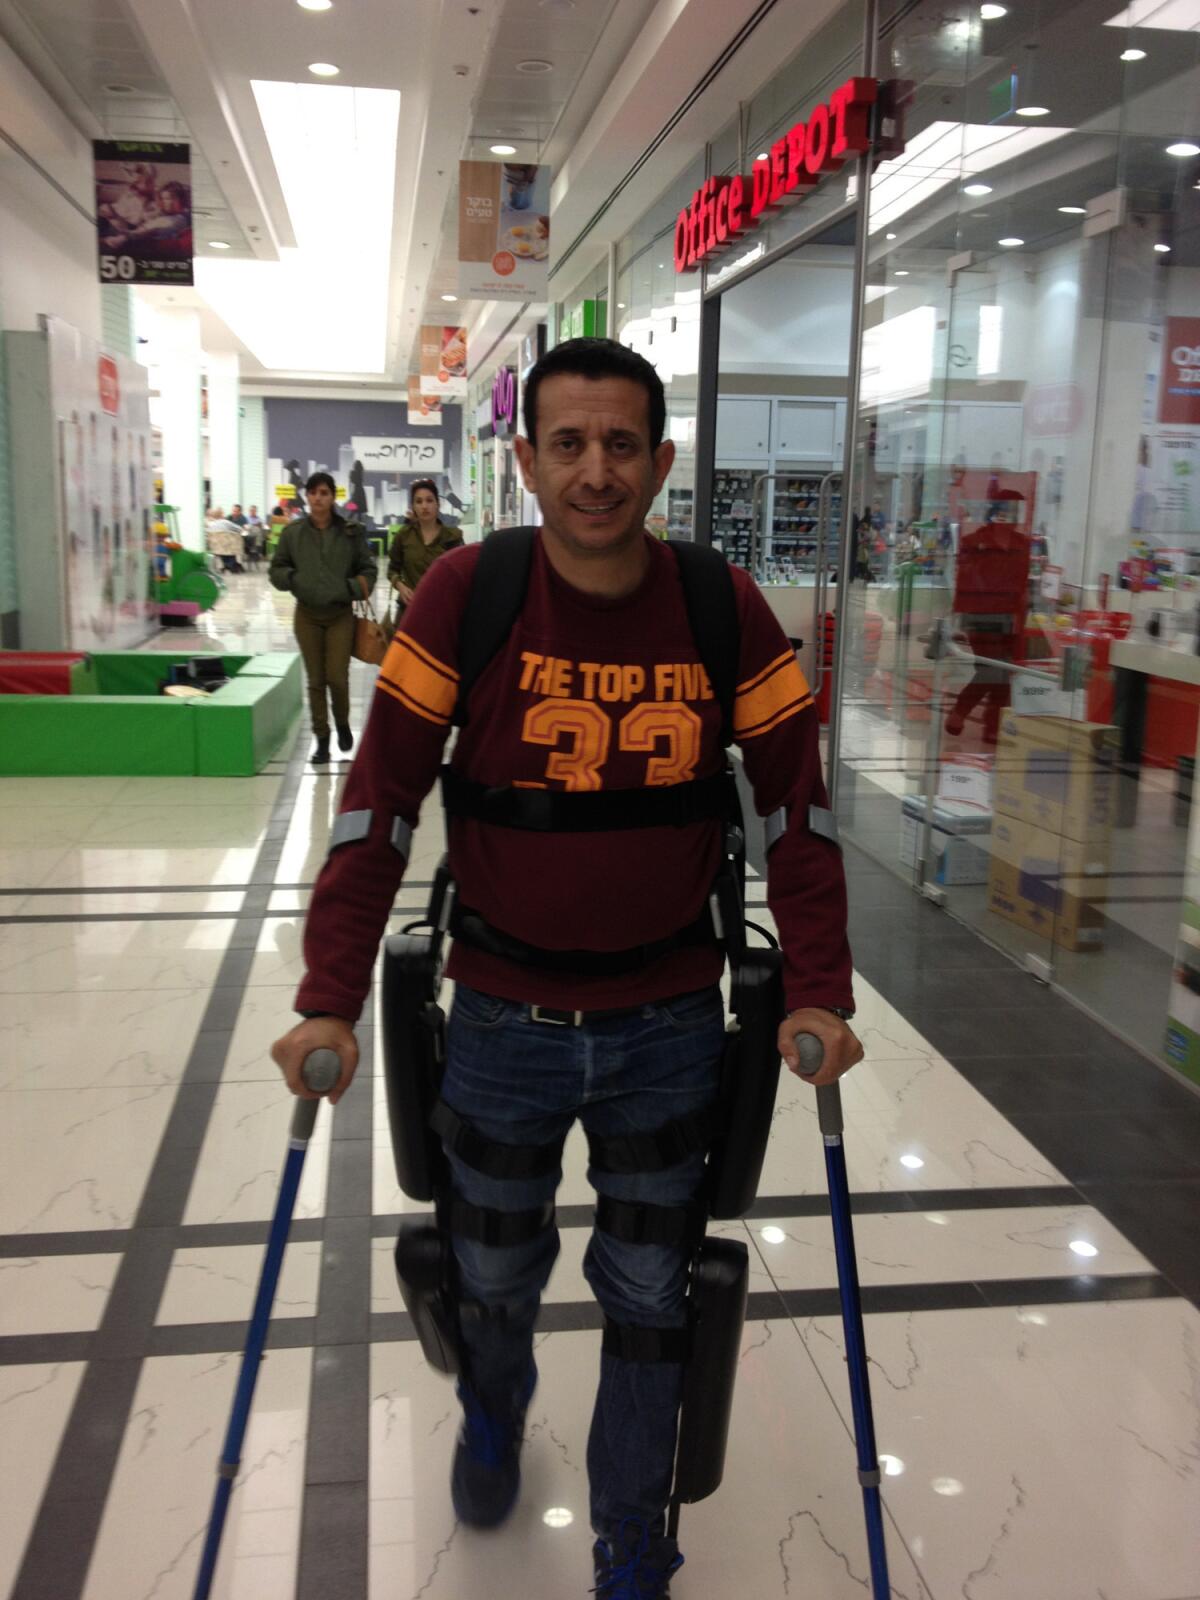 Radi Kaiuf, using the ReWalk device that enables paraplegics to walk with the help of robotic leg braces, completed a 10-kilometer race in Tel Aviv.